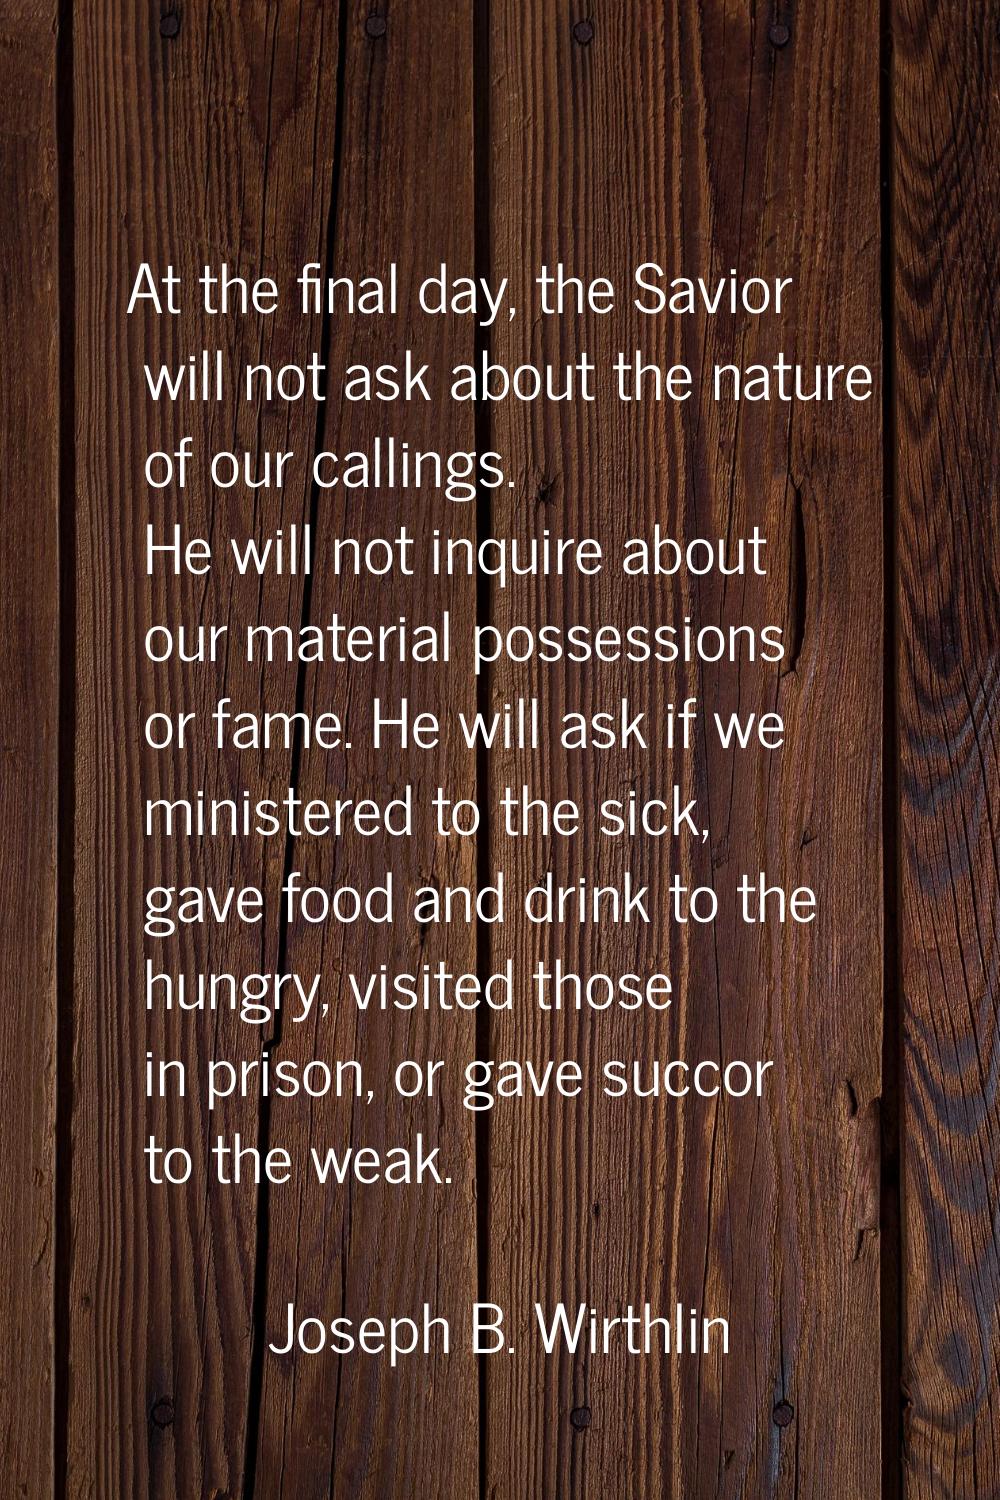 At the final day, the Savior will not ask about the nature of our callings. He will not inquire abo